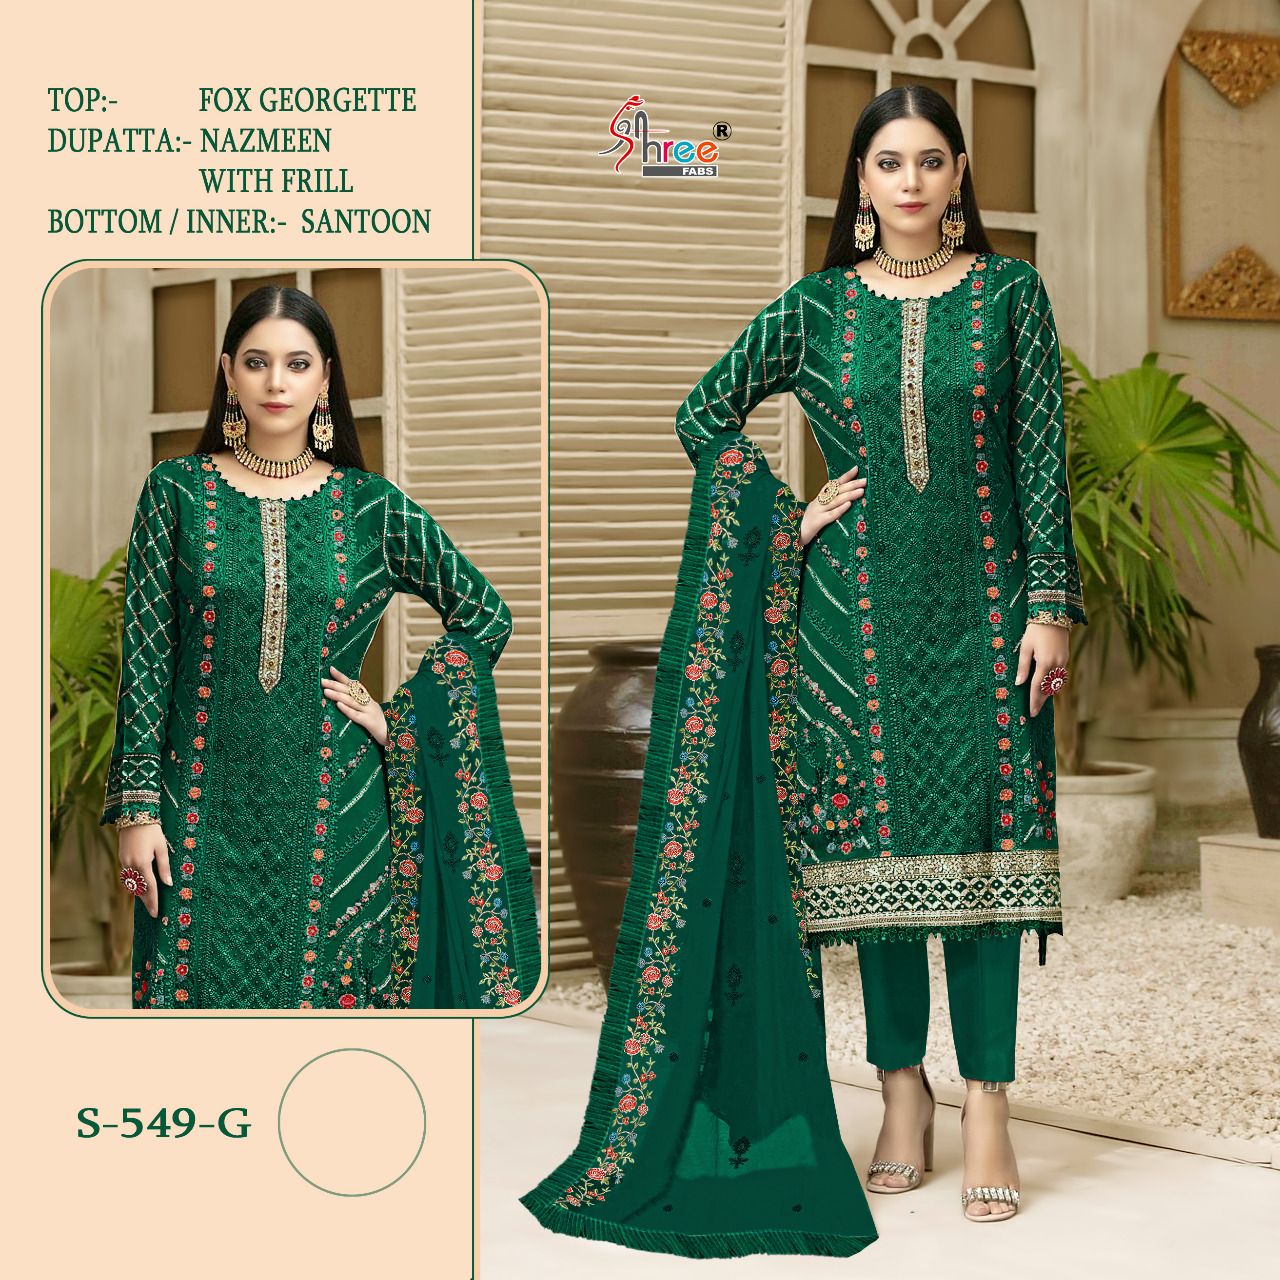 SHREE FABS S 549 G PAKISTANI SUITS IN INDIA